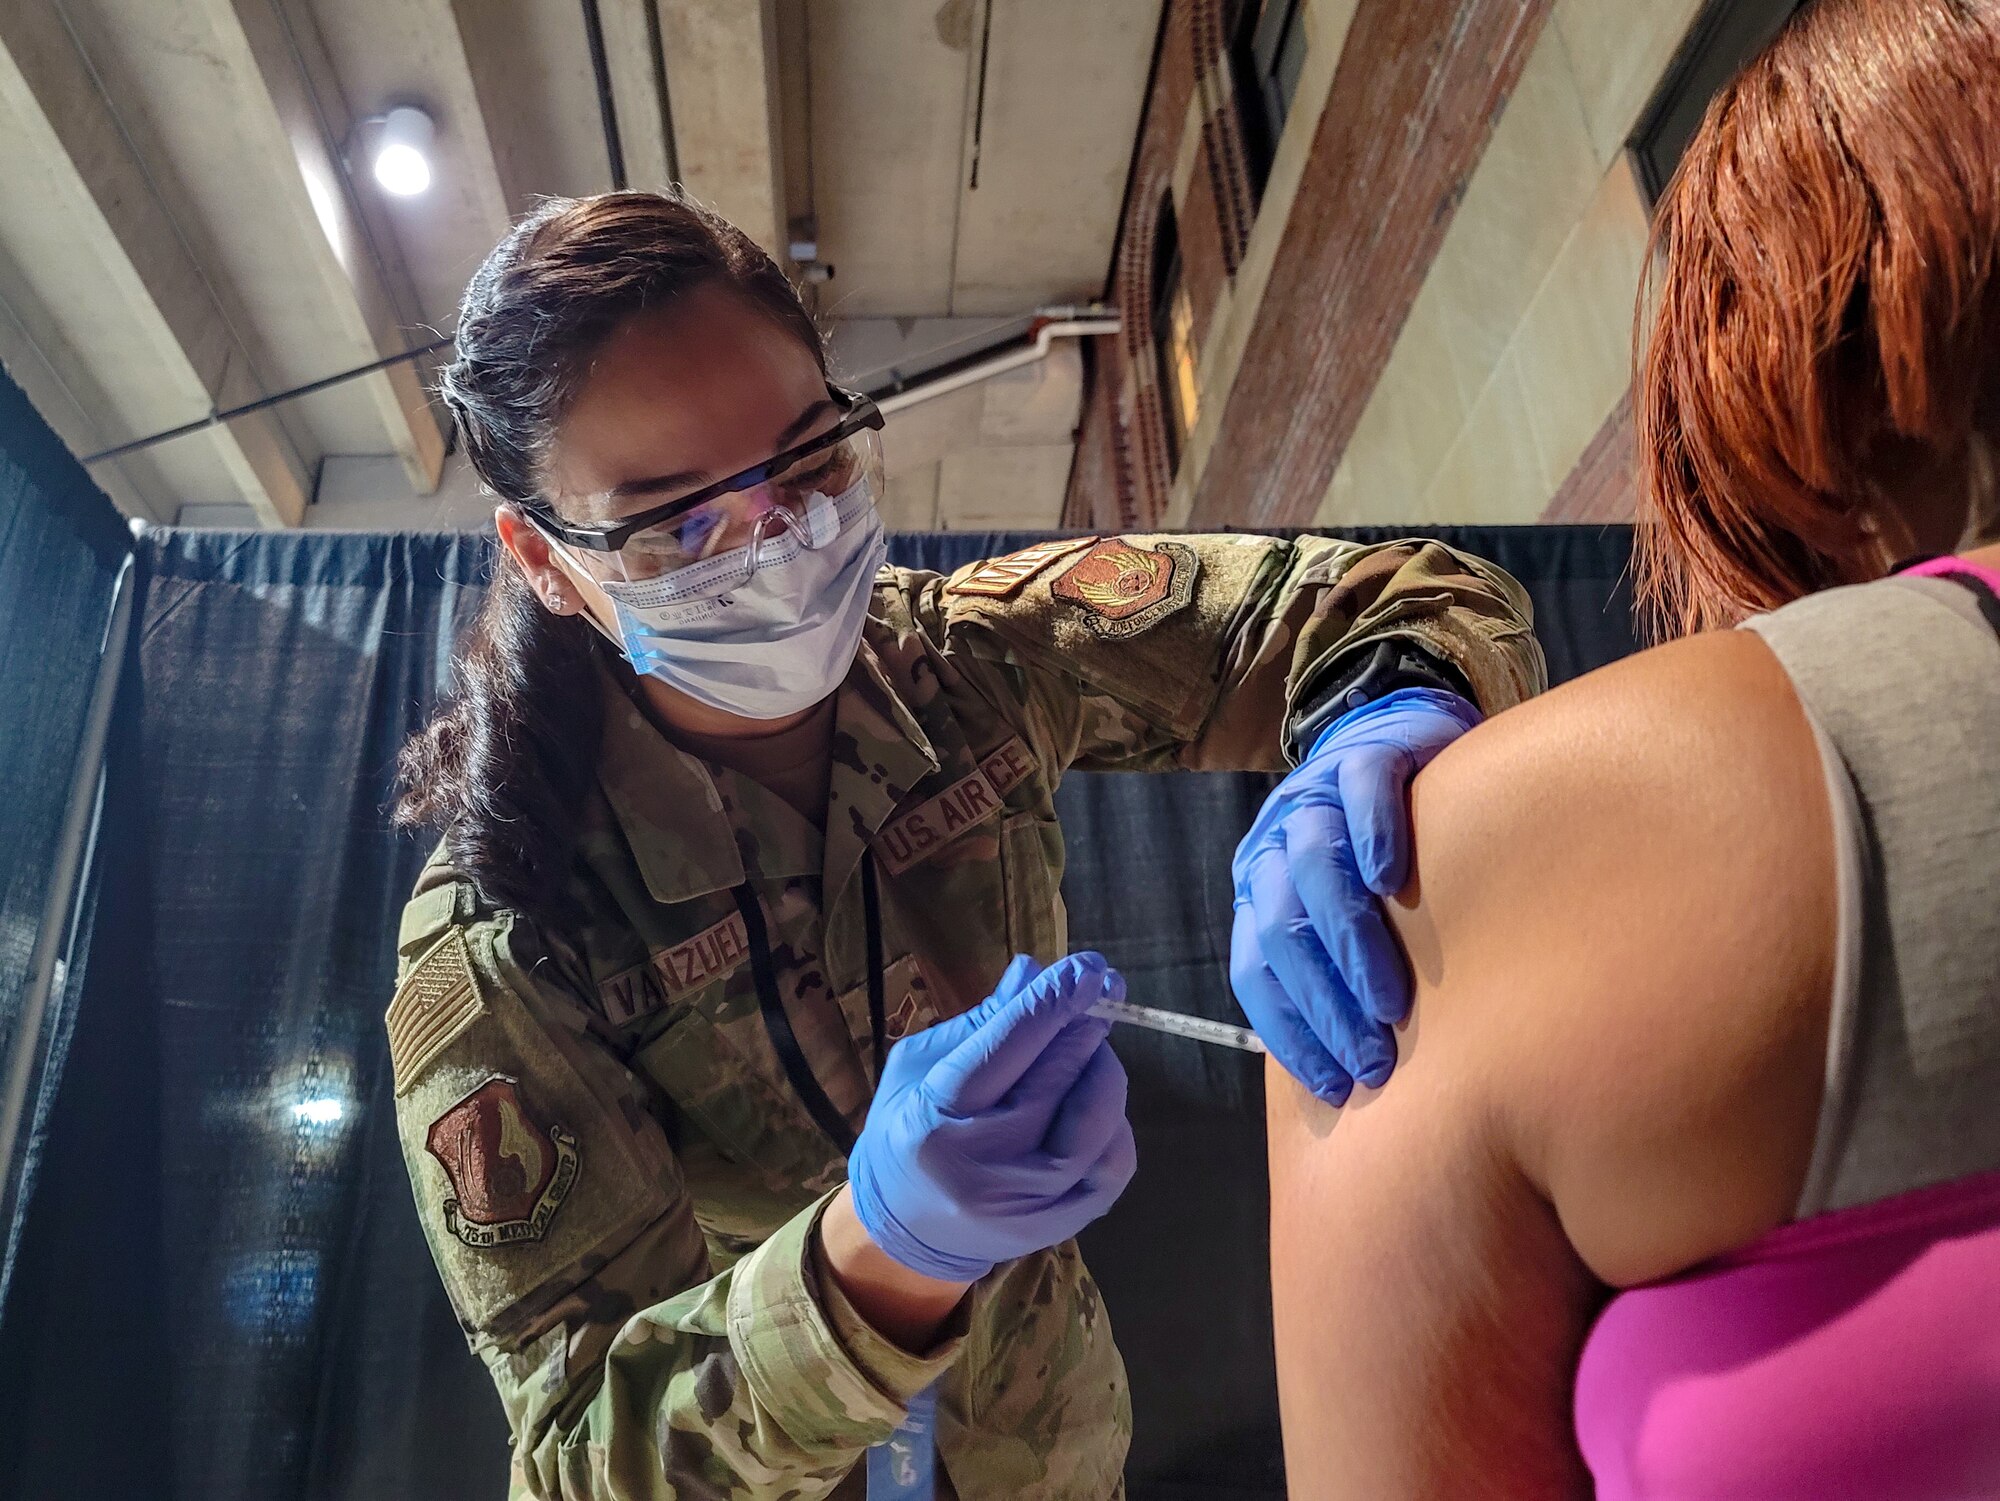 U.S. Airman 1st Class Pollyann Valenzuela, a Los Angeles native and medic with the 75th Medical Group stationed at Hill Air Force Base, Utah, assigned to 1st Detachment, 64th Air Expeditionary Group, administers a COVID-19 vaccination to a local community member at the state-run, federally-supported Ford Field COVID-19 Community Vaccination Center in Detroit, March 26, 2021. The Ford Field CVC is being supported by members of the Federal Emergency Management Agency, Henry Ford Health Systems, Michigan Department of Health, Meijer and the U.S. Air Force. U.S. Northern Command, through U.S. Army North, remains committed to providing continued, flexible Department of Defense support to FEMA as part of the whole-of-government response to COVID-19. (U.S. Army photo by Spc Andrew Wash, 5th Mobile Public Affairs Detachment)